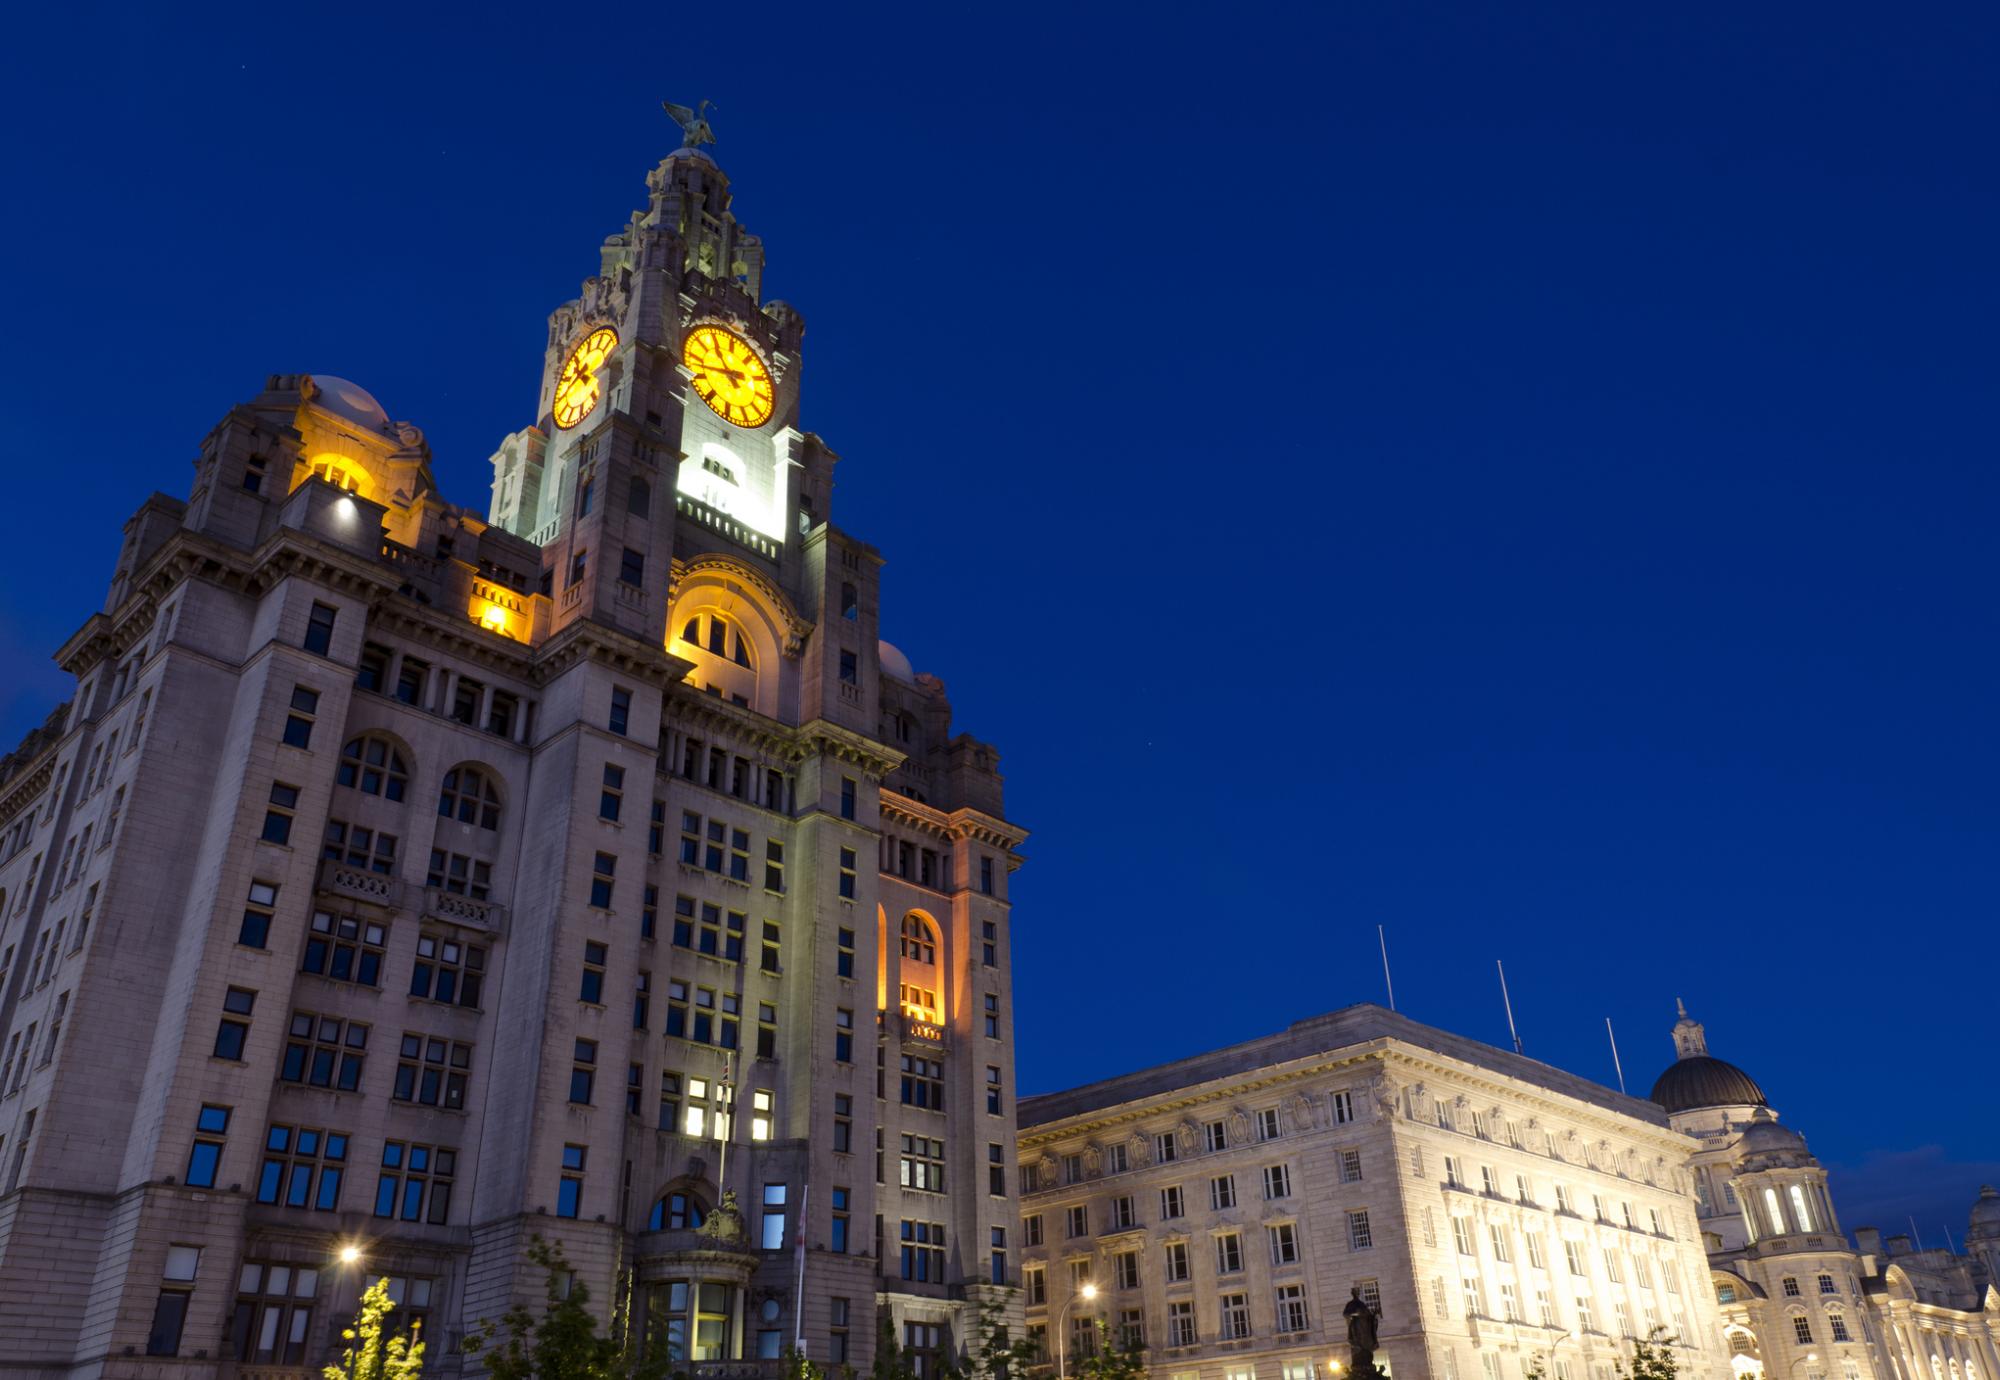 Royal Liver Building at night, Liverpool.